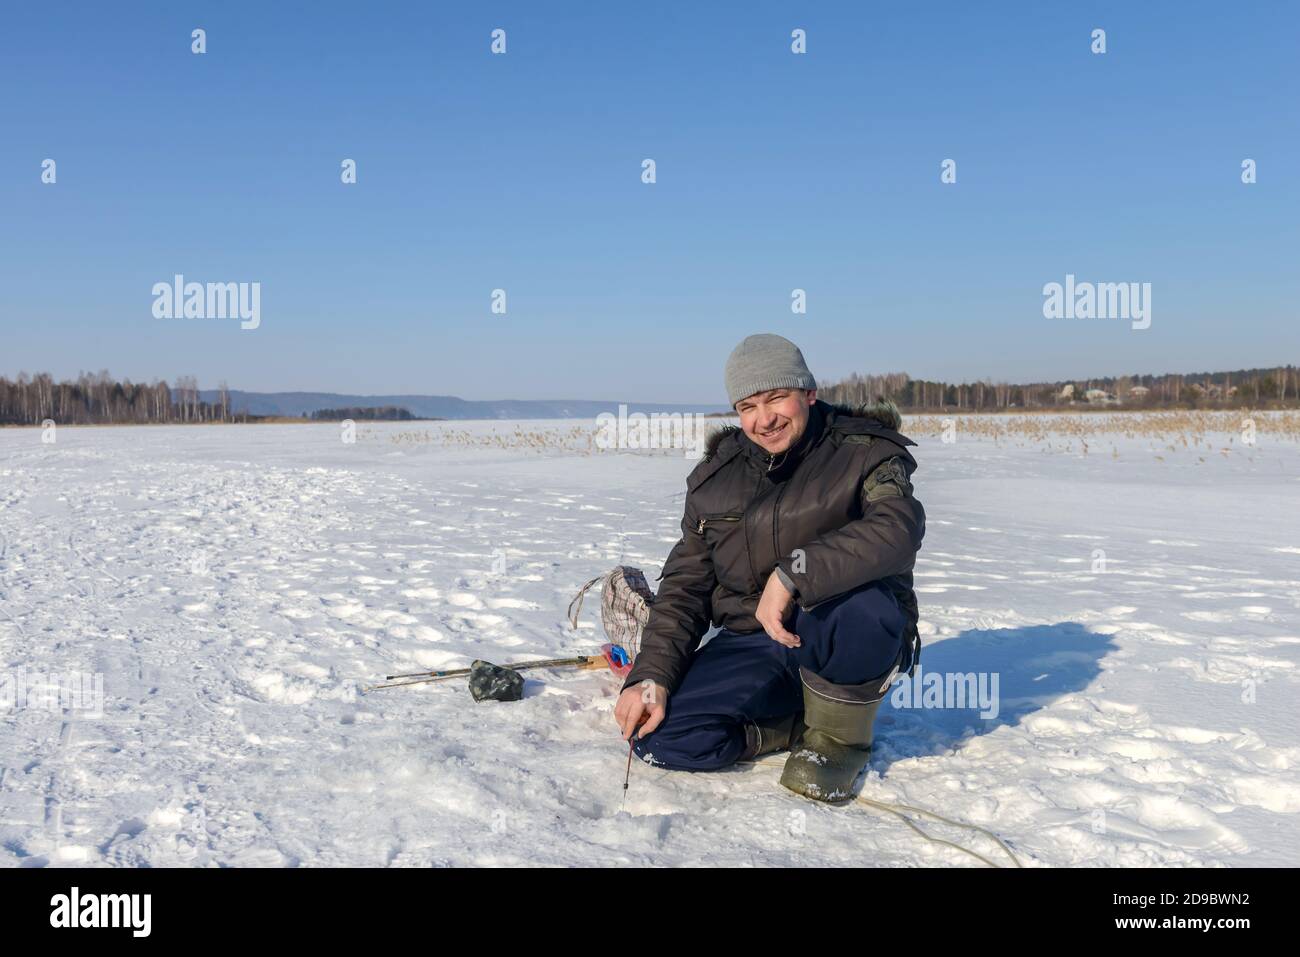 Fisherman near the ice hole catches fish on the ice. Winter fishing. Ice fishing. Russia. February 20, 2016 Stock Photo